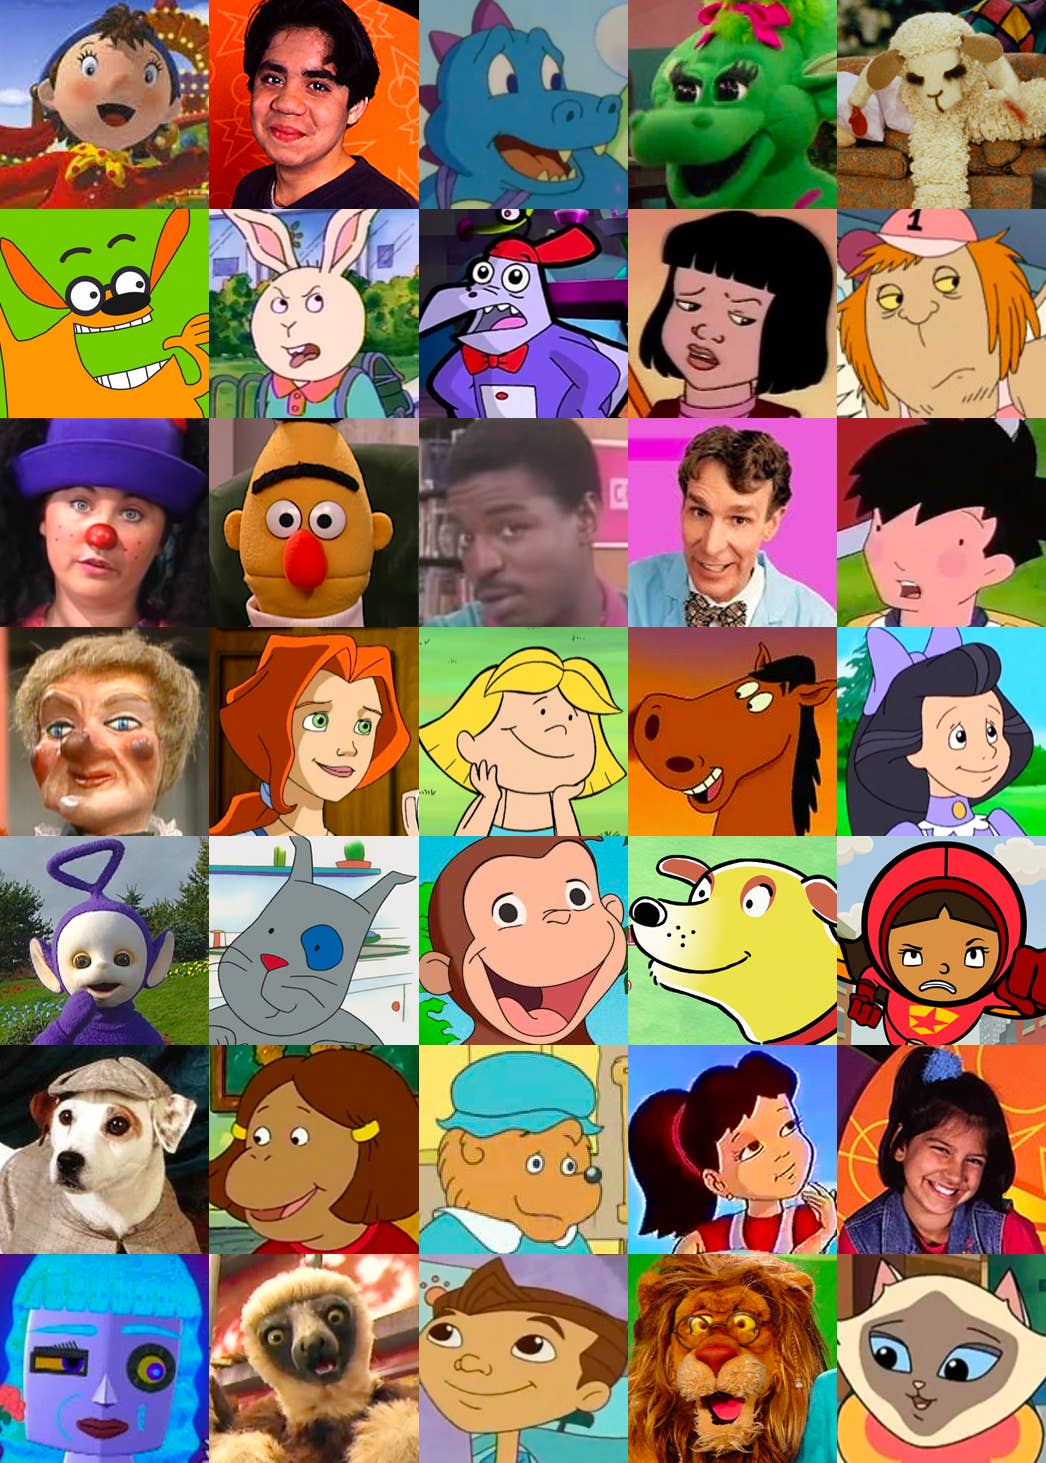 Can You Identify All 35 Of These PBS Kids Characters?